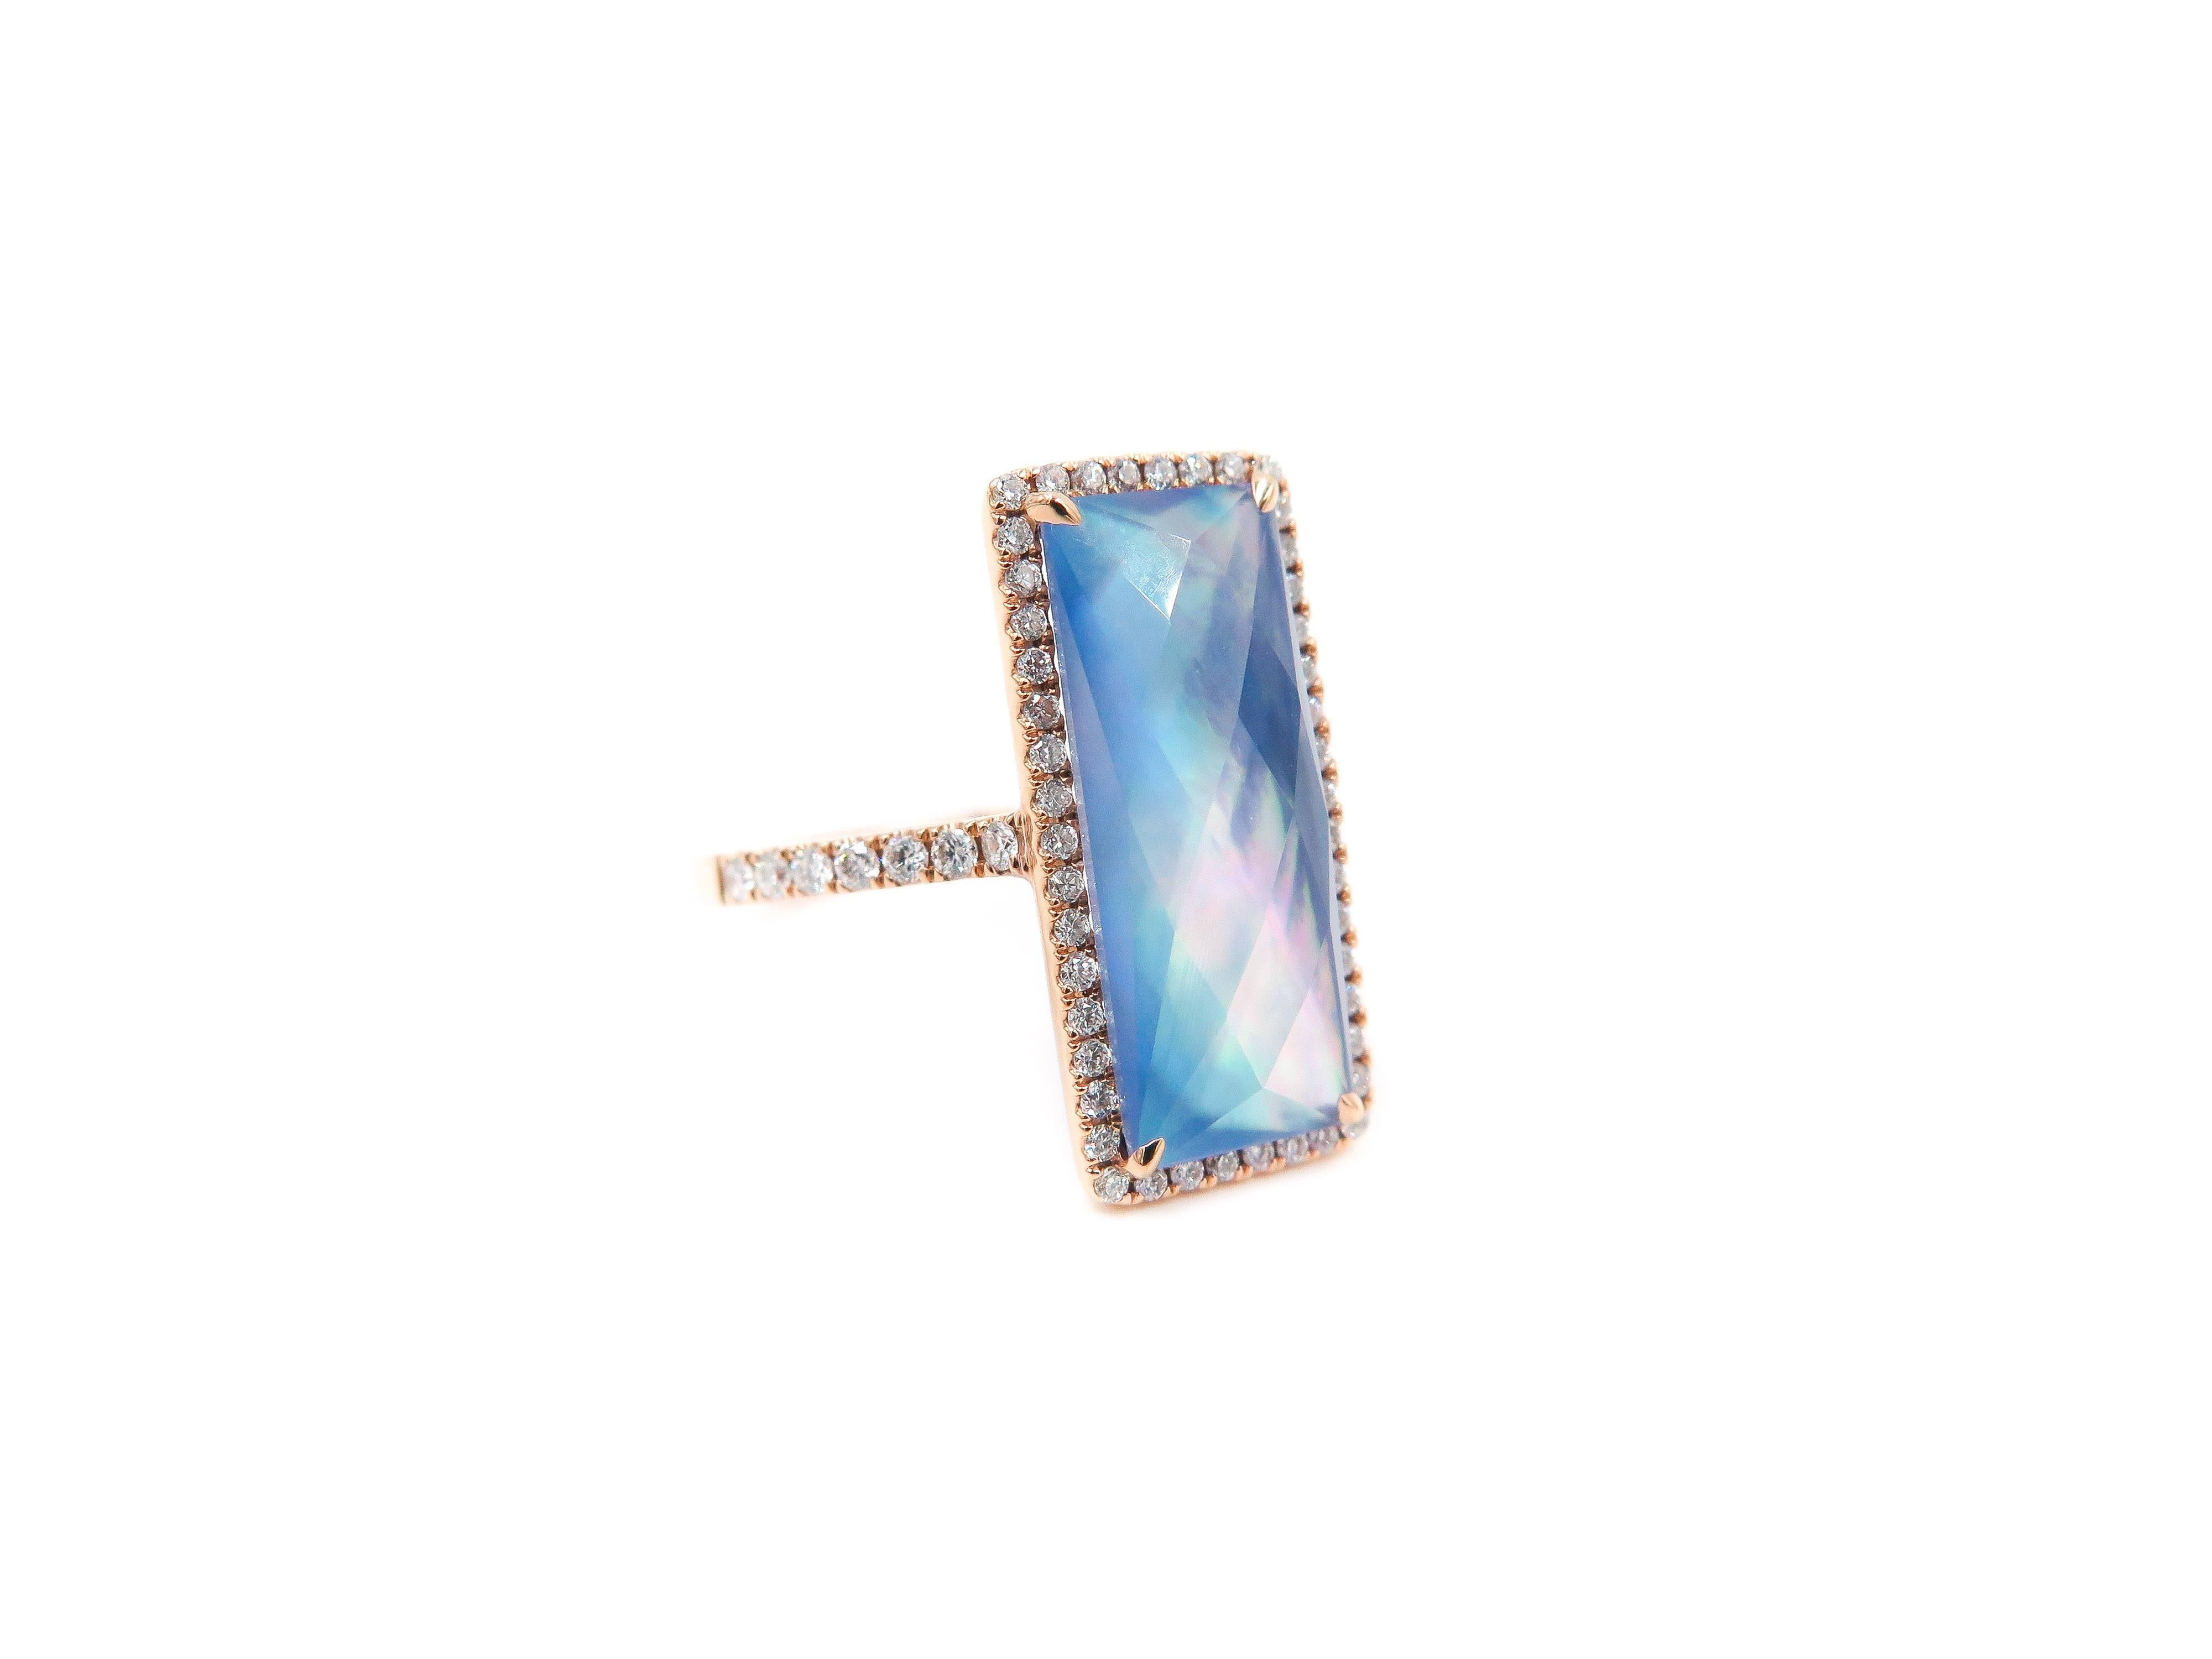 As every design starts with a pencil and a sketch board. 
Combining 18 karat rose gold, lapis lazuli, mother of pearl, faceted white topaz and diamonds layered to create this unique and eye catching ring.
Handcrafted to fit finger size 6.5
This